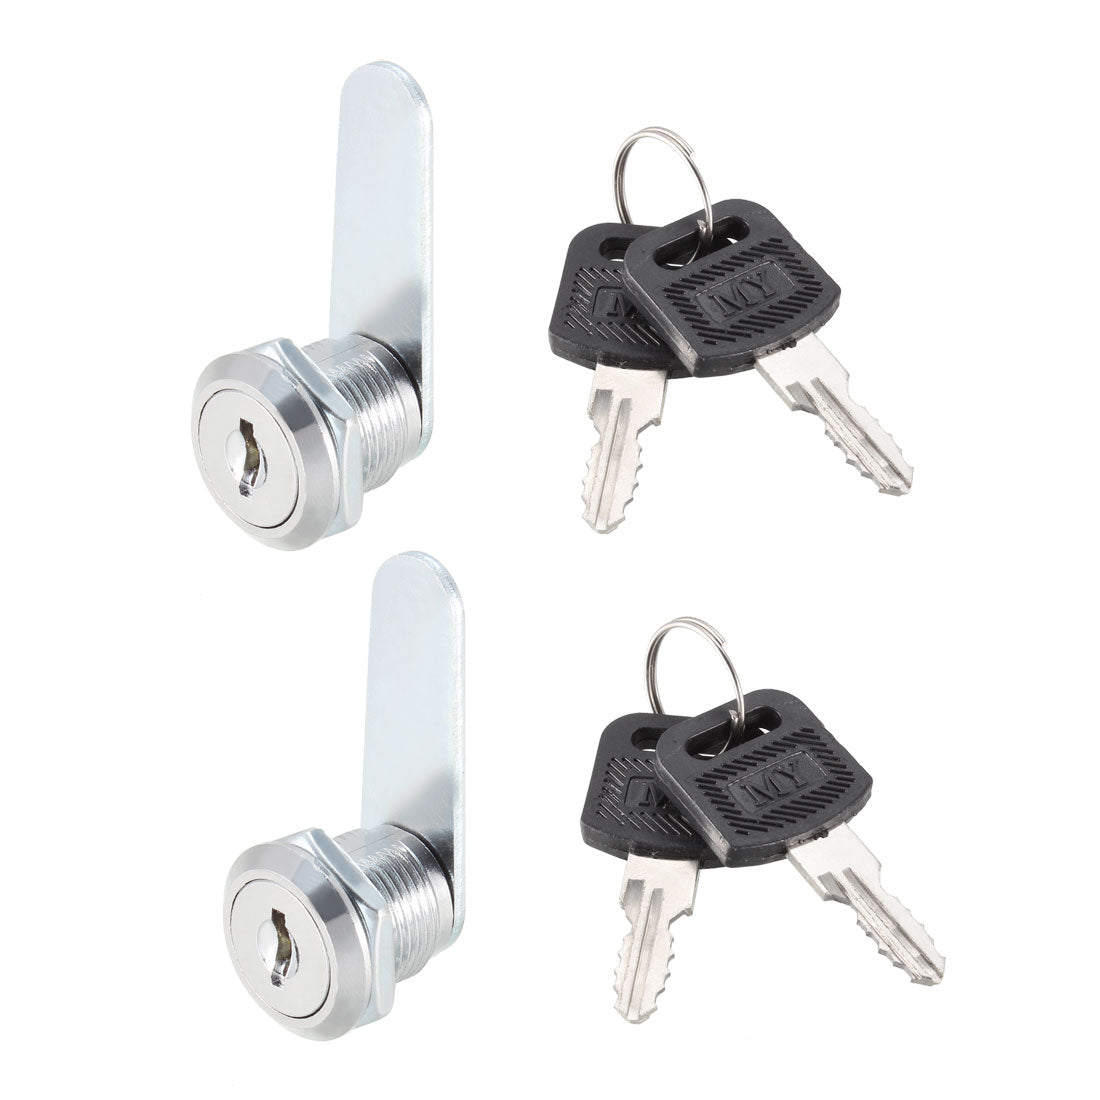 uxcell Uxcell Cam Lock 16mm Cylinder Length Fits Max 5/16-inch Panel Keyed Different 2Pcs